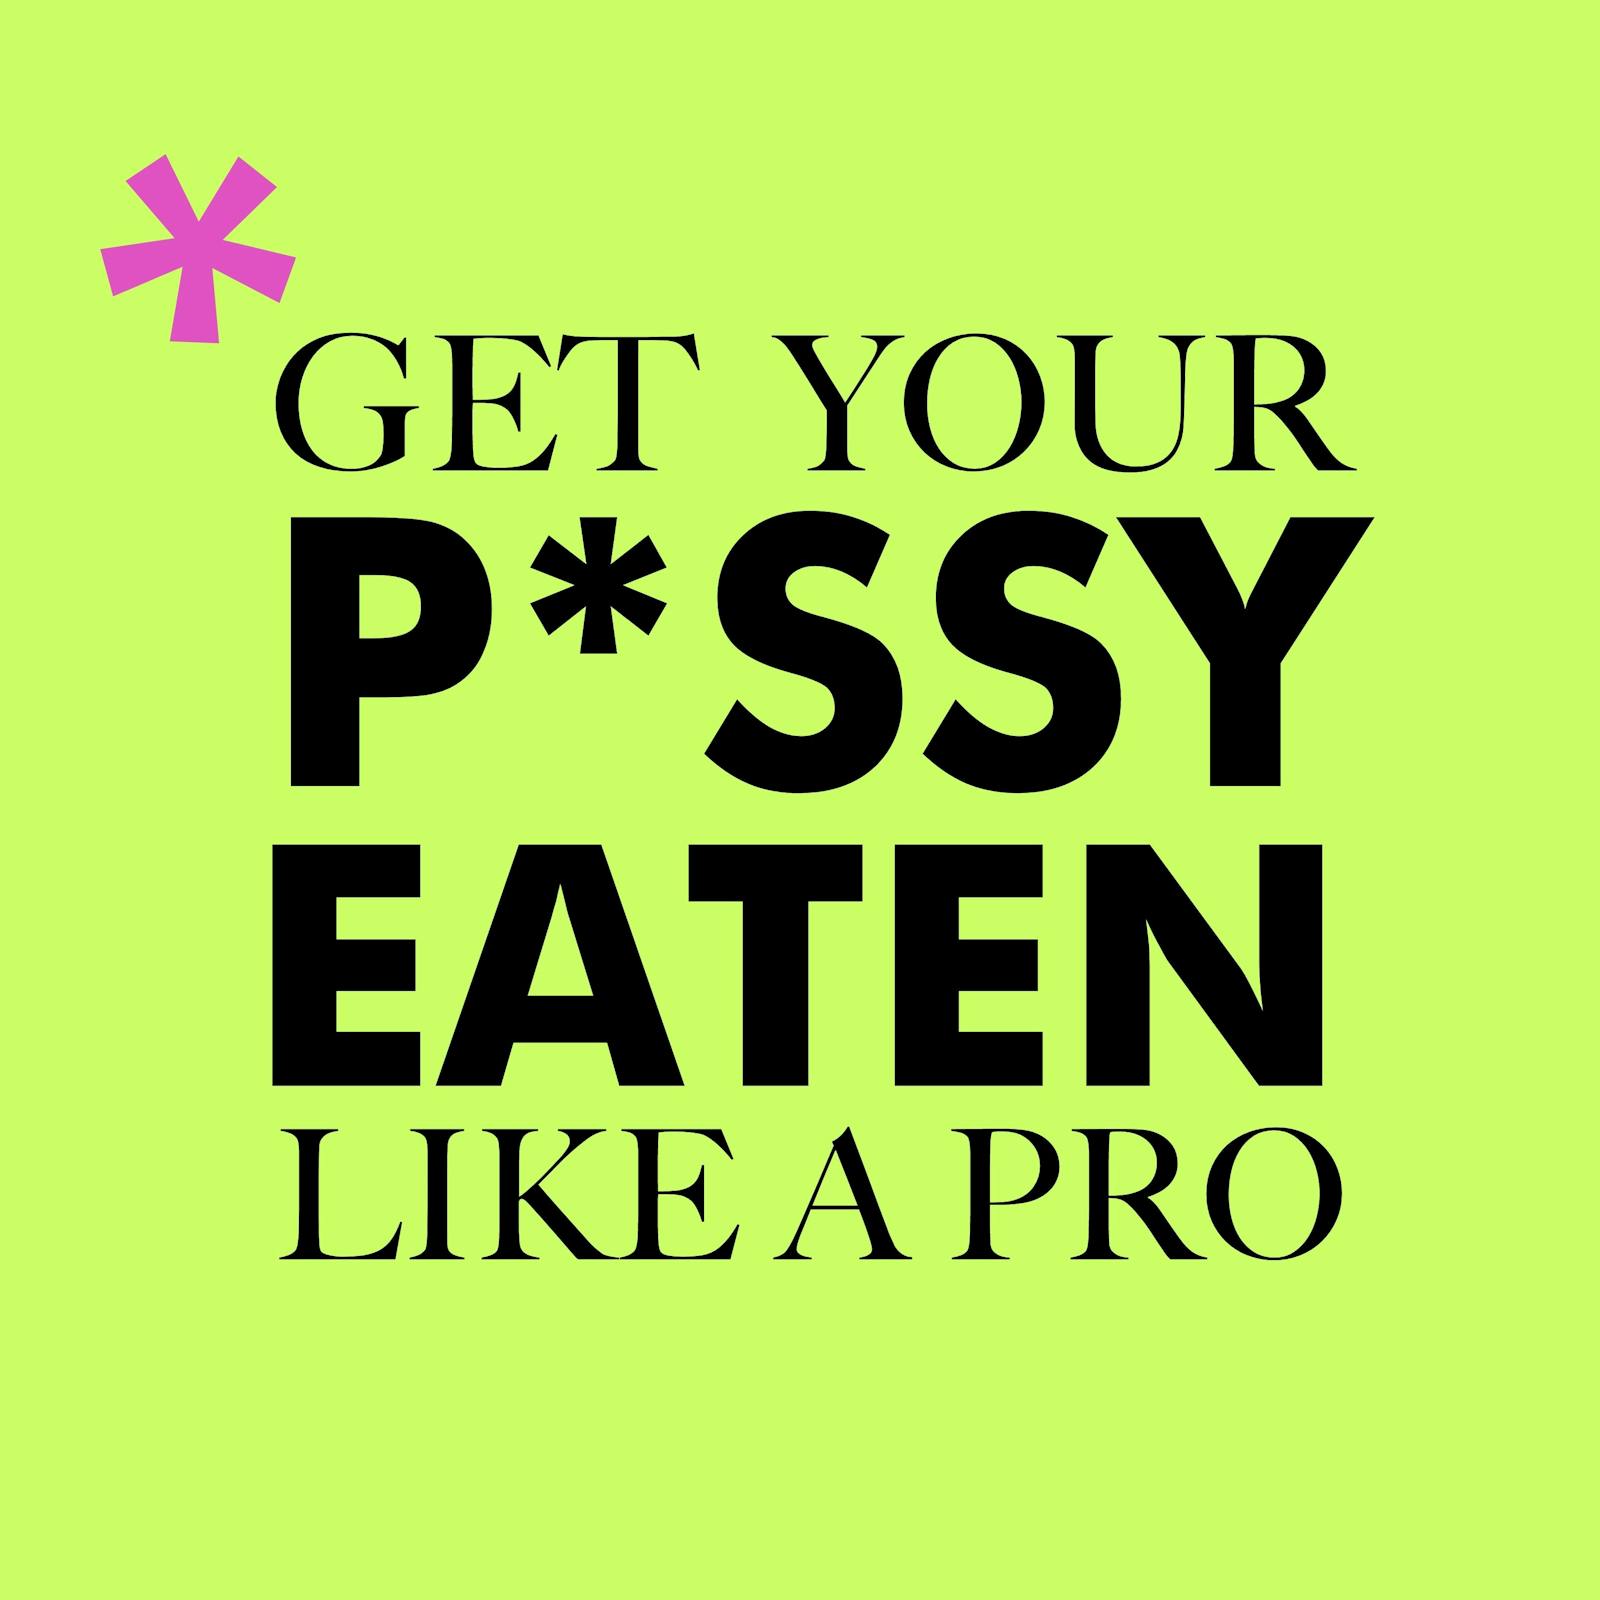 GET YOUR P*SSY EATEN LIKE A PRO